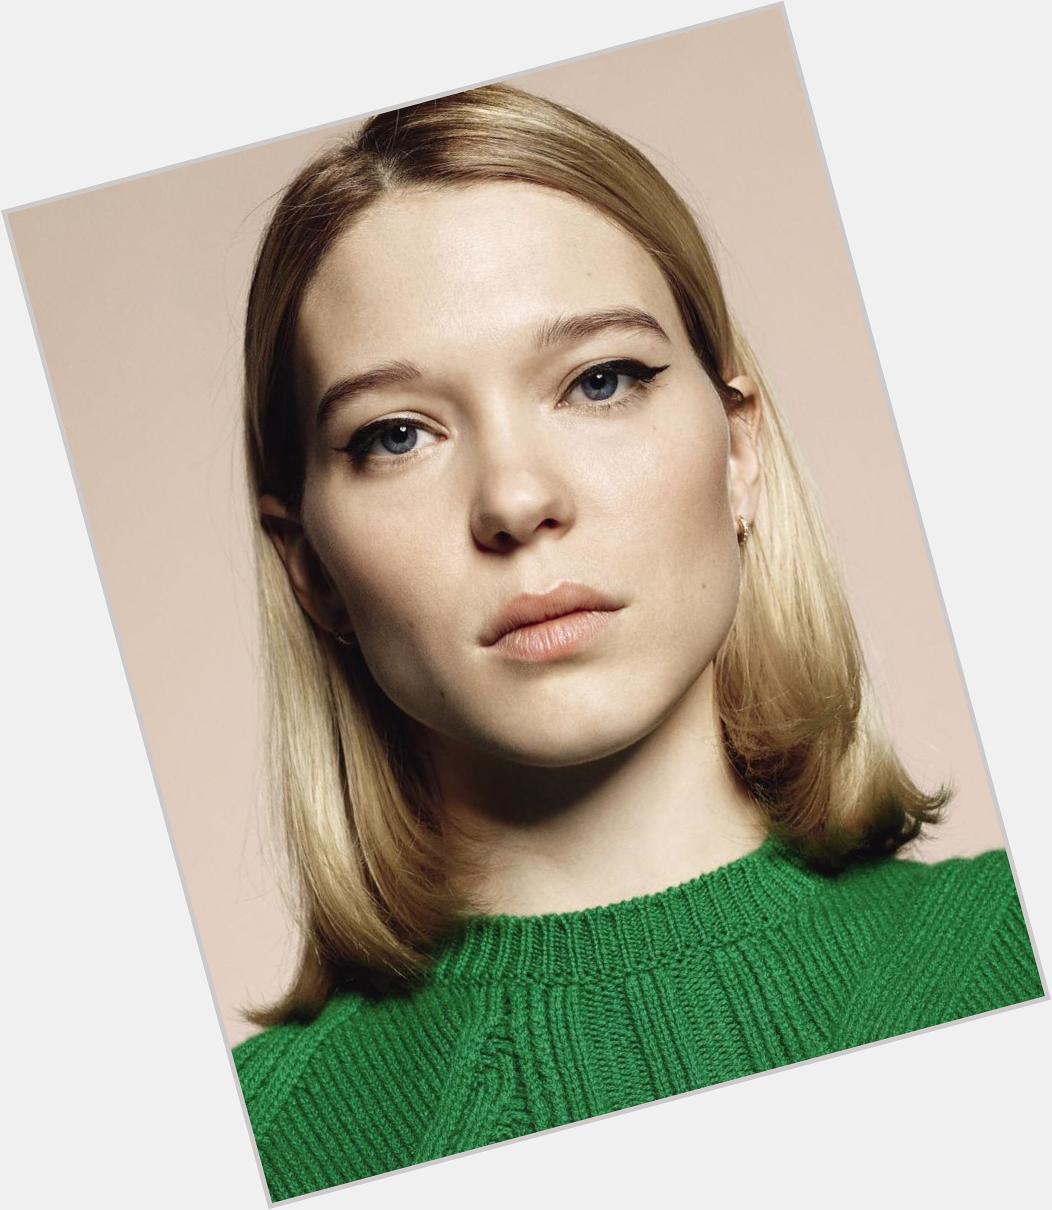 Happy birthday to my mother, Léa Seydoux, who turns th*rty today 